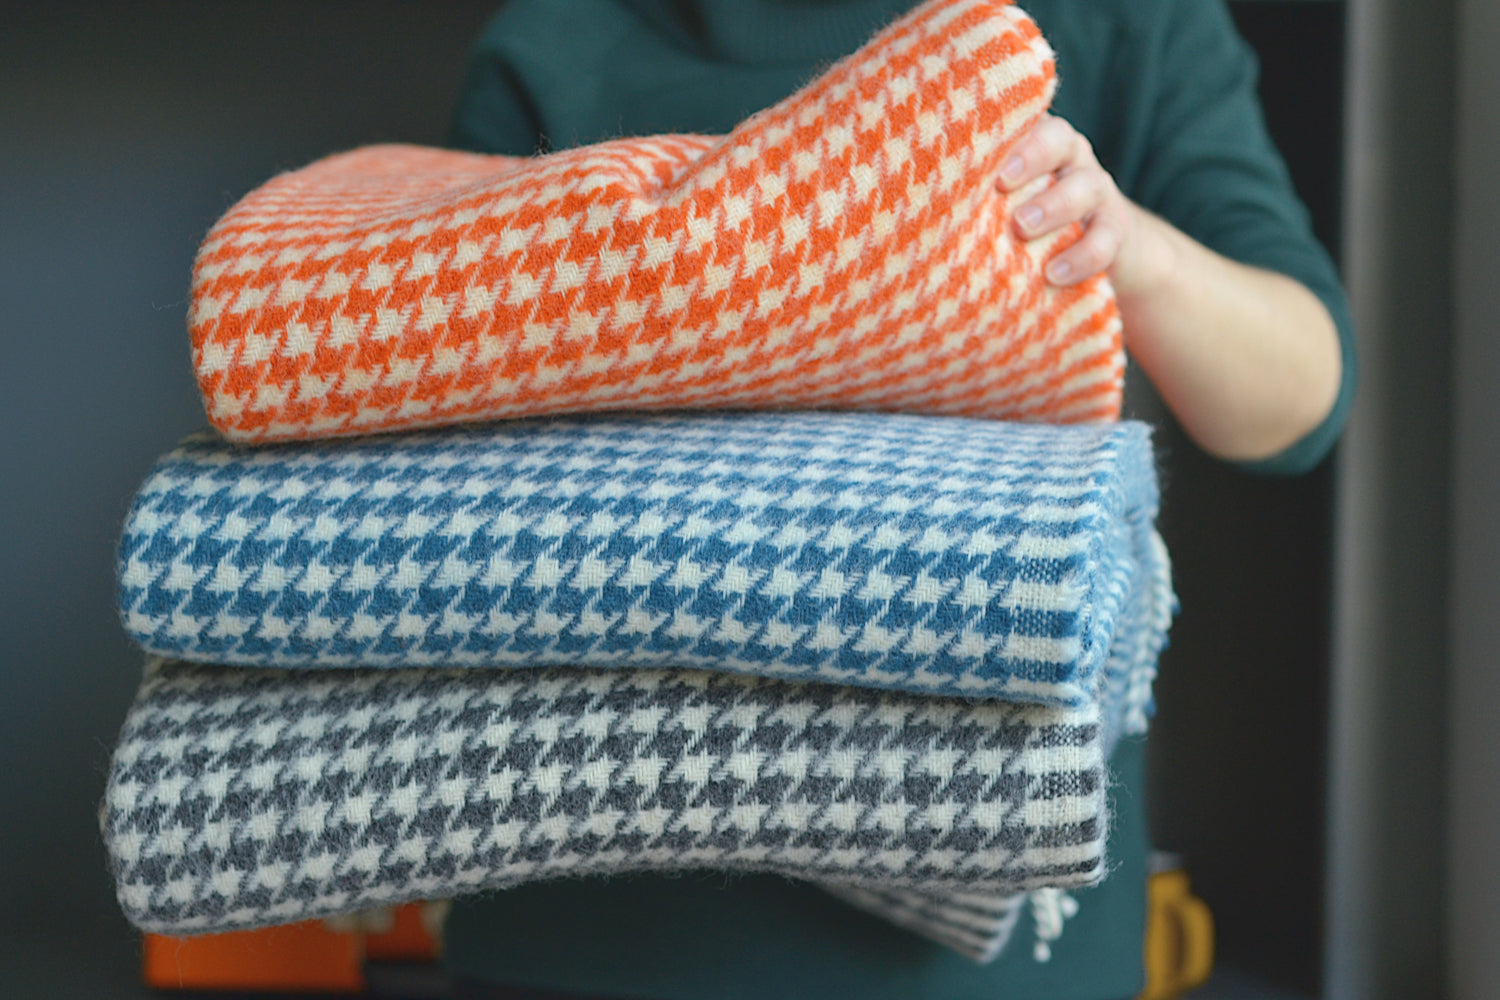 What's New This Summer with our British-Made Blankets